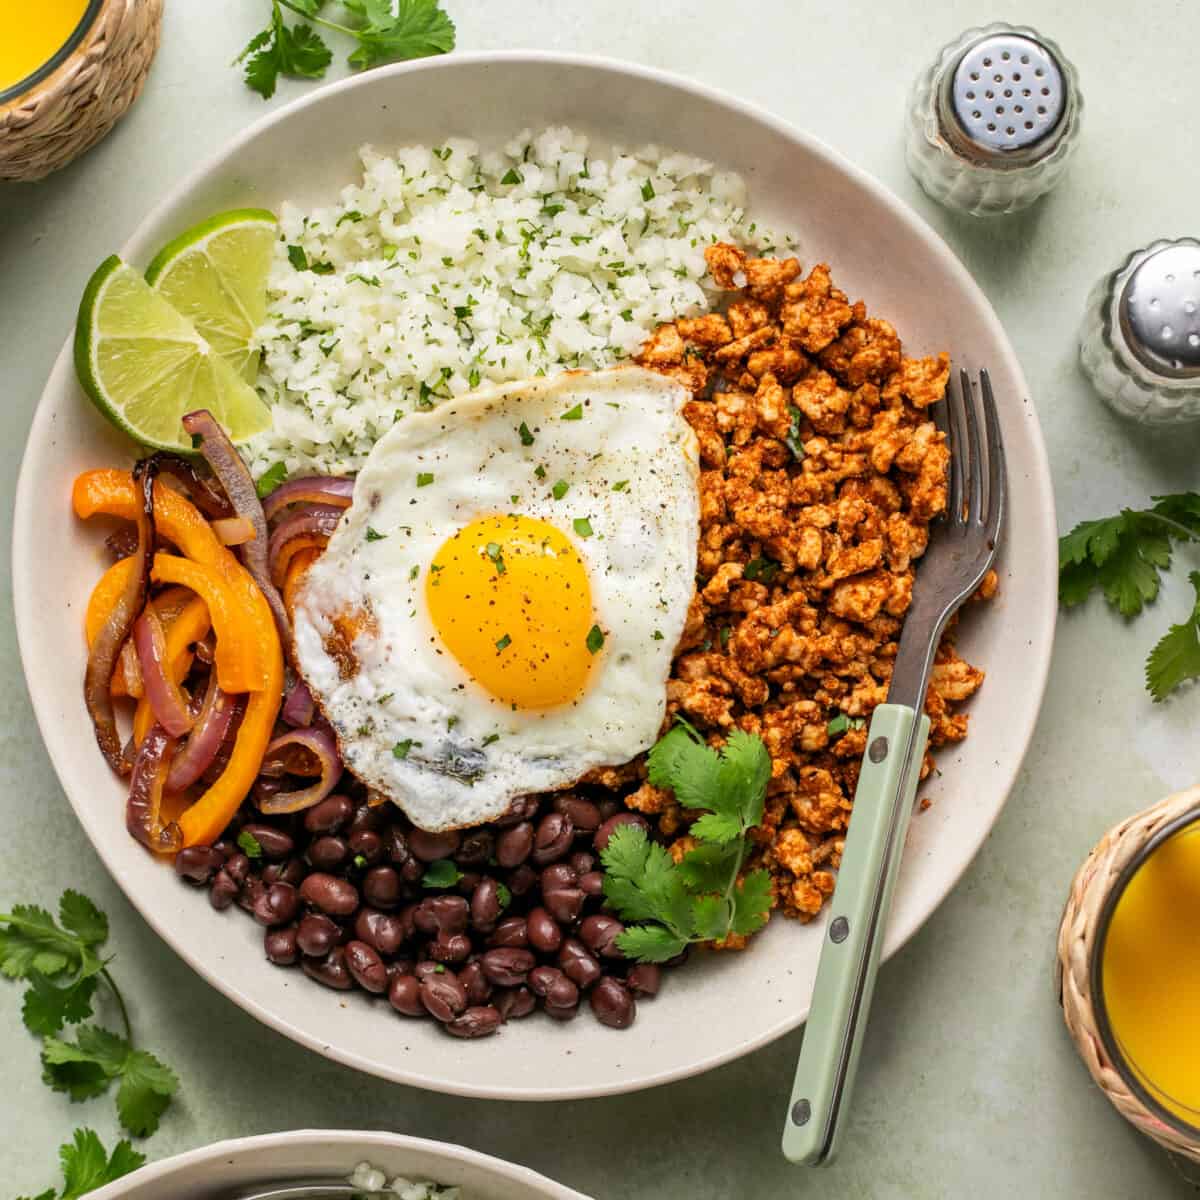 Breakfast bowl full of beans, veggies, cilantro, cauliflower rice and a fried egg on top.